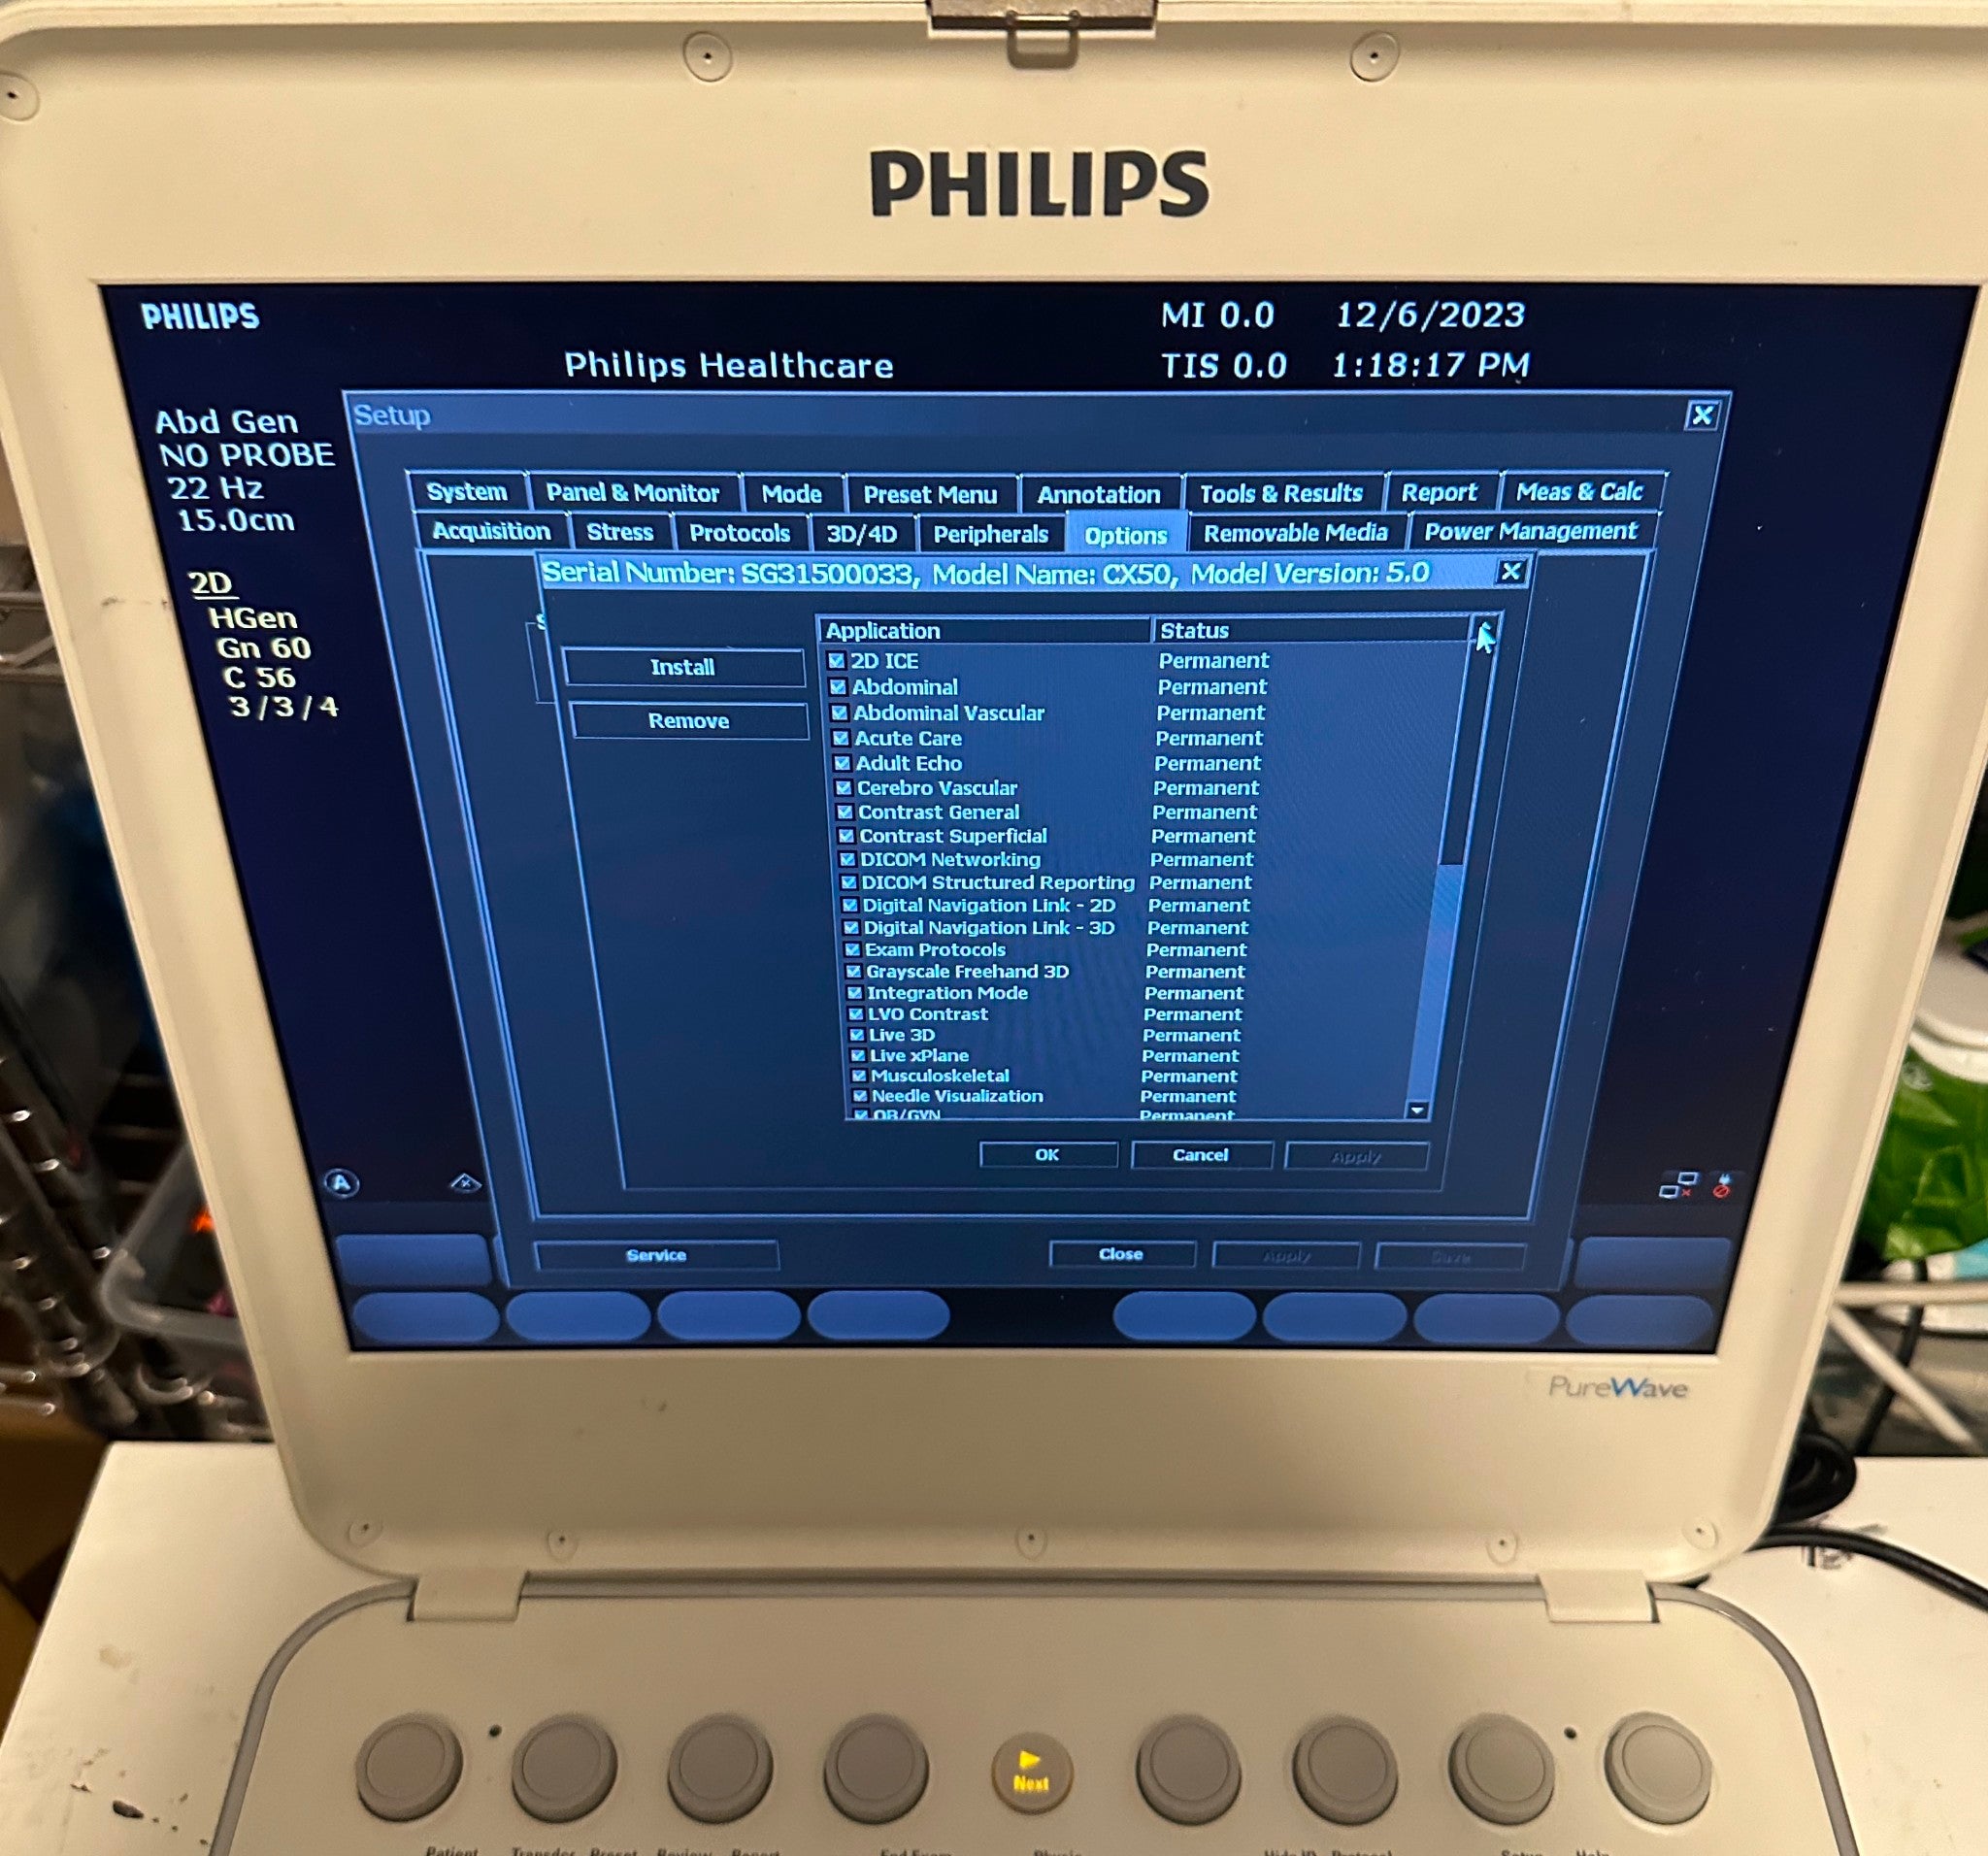 Philips CX50 2015 Portable Ultrasound Scanner Machine-Rev 5.0.0 All Options Open DIAGNOSTIC ULTRASOUND MACHINES FOR SALE